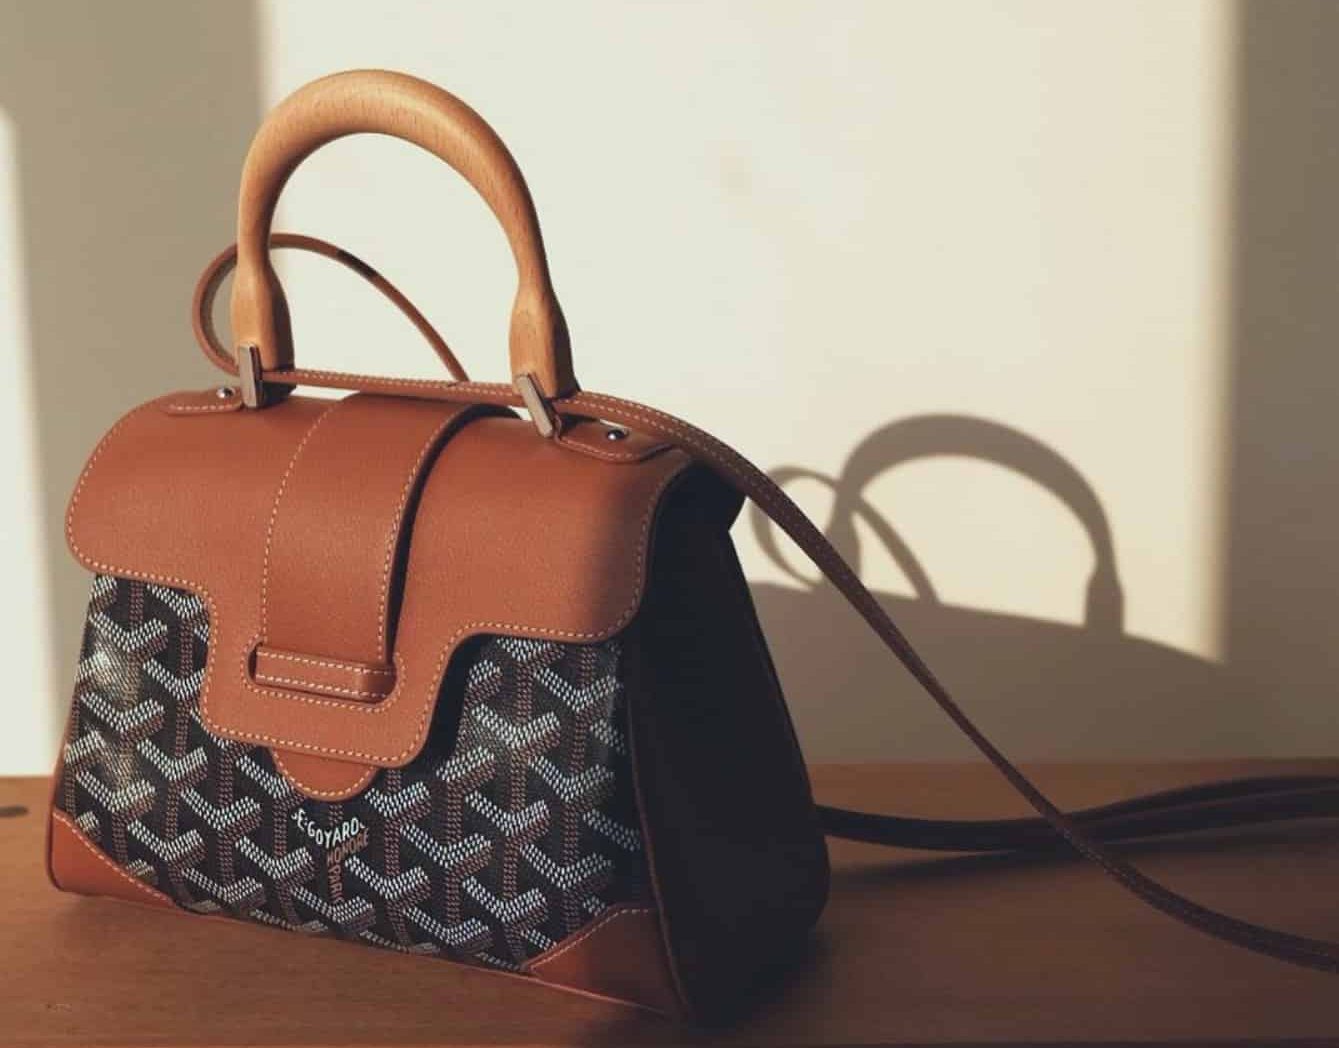 Read more about the article 8 Things to Know About the Goyard Saigon Bag: Review, Prices, Styles, Review and More